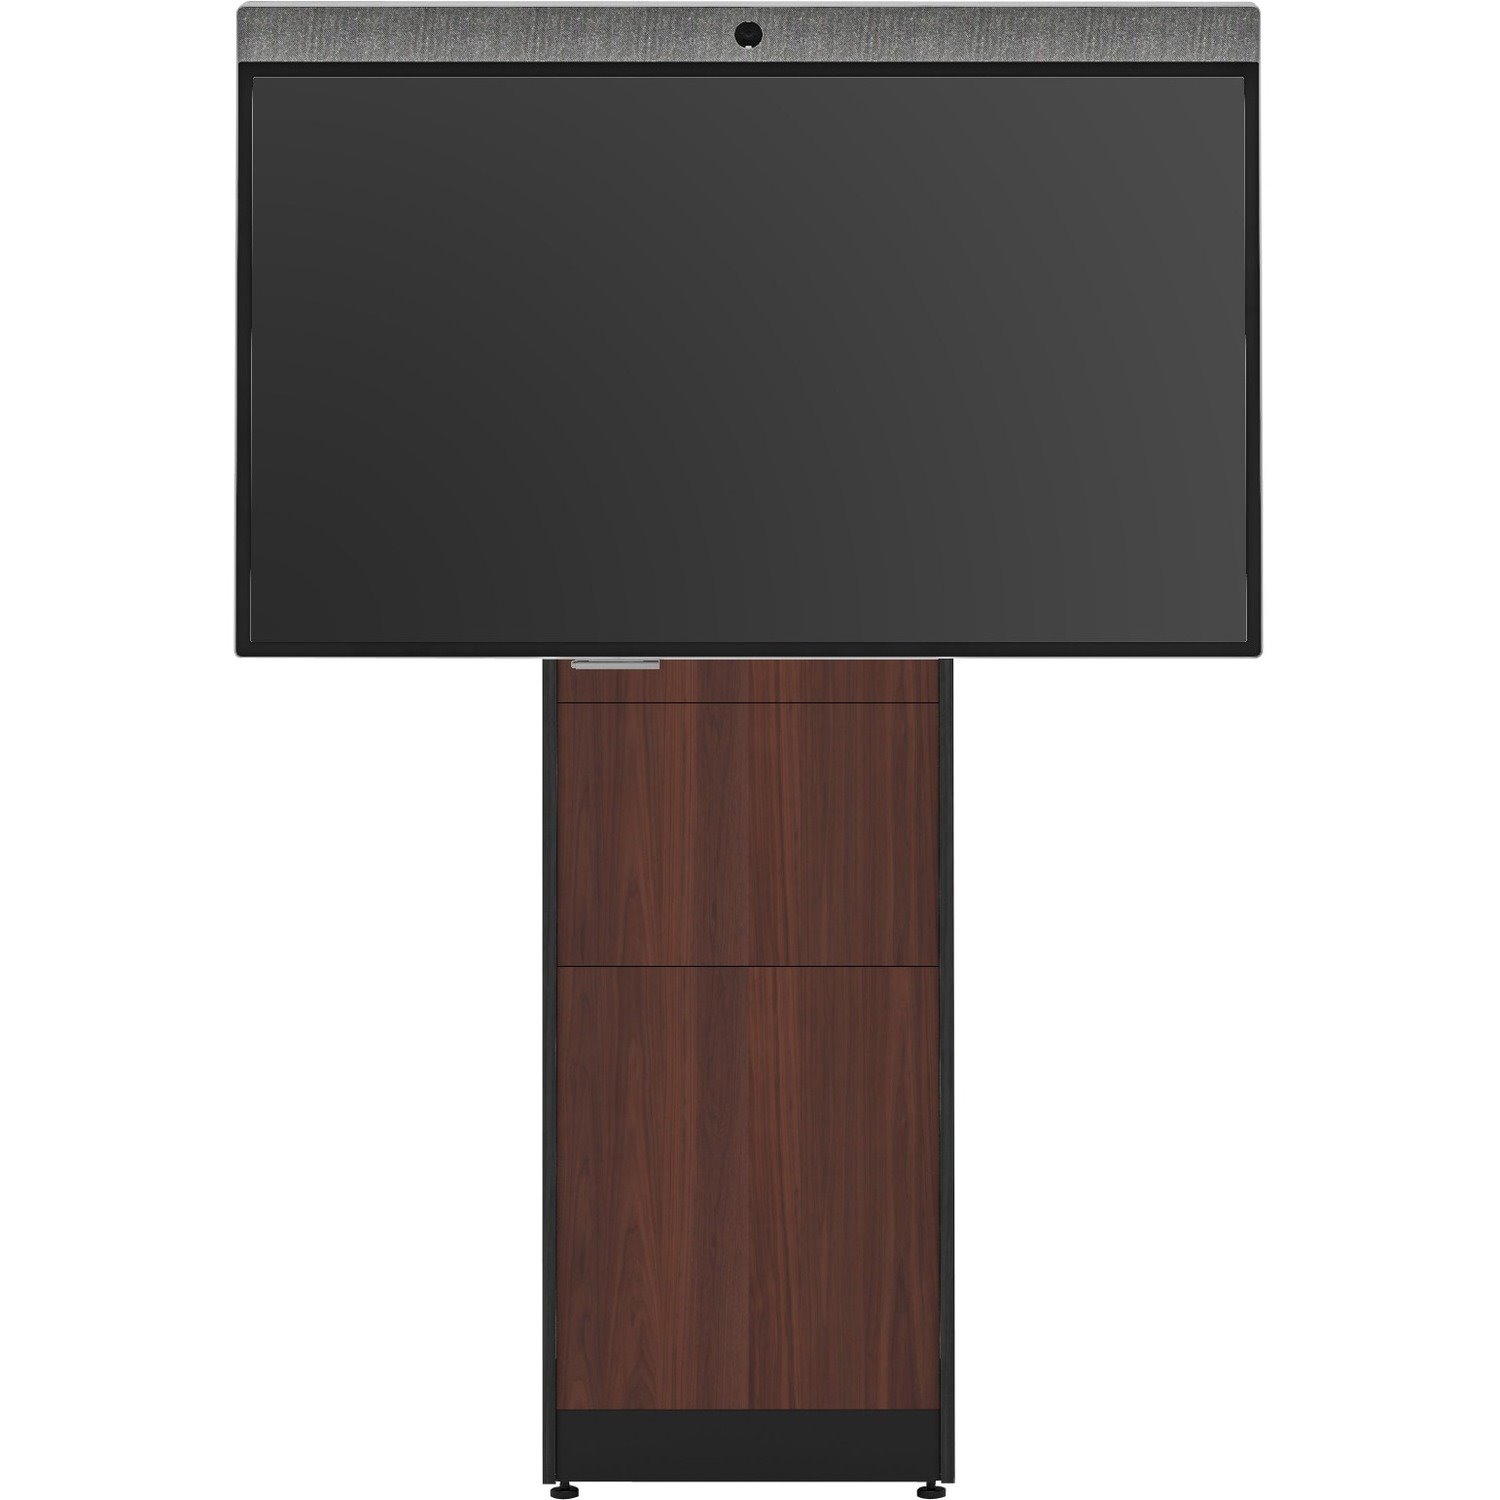 Salamander Designs Wall Mount for Electronic Equipment, Computer, Cable, Display, Camera, Speaker, Video Conference Equipment, Peripheral Device - Medium Walnut, Black